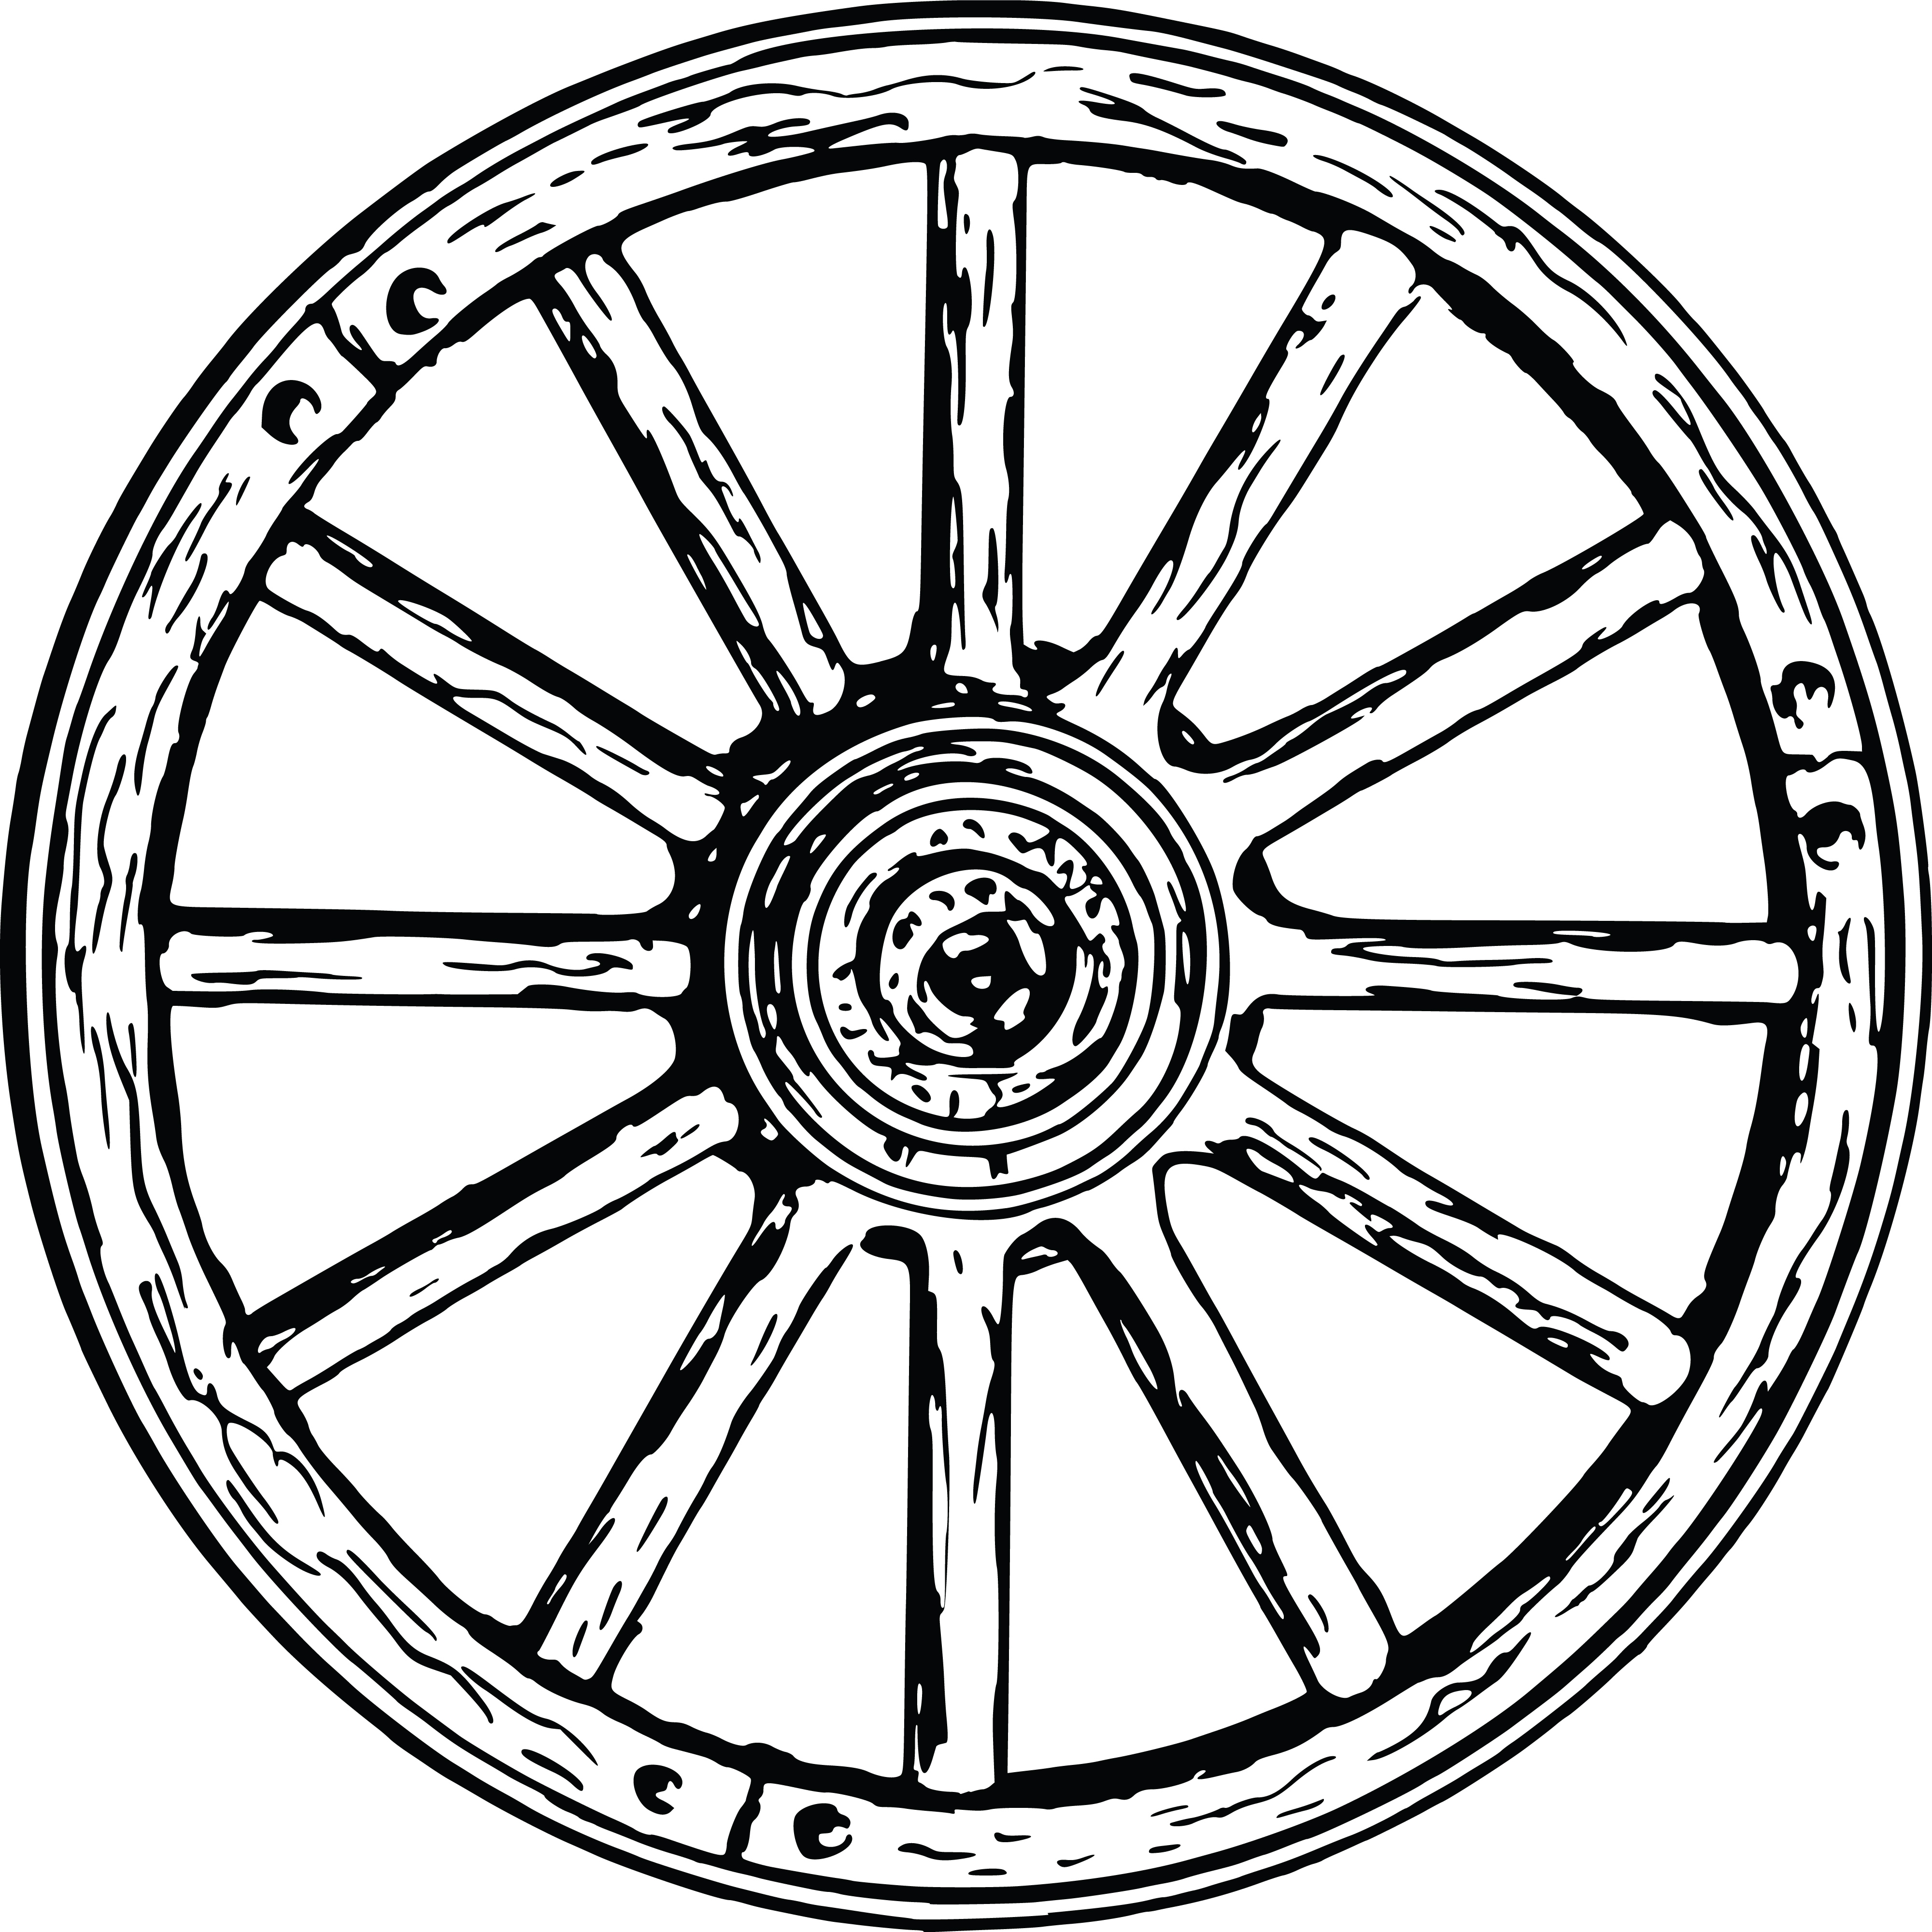 Free Clipart Of A wagon wheel.